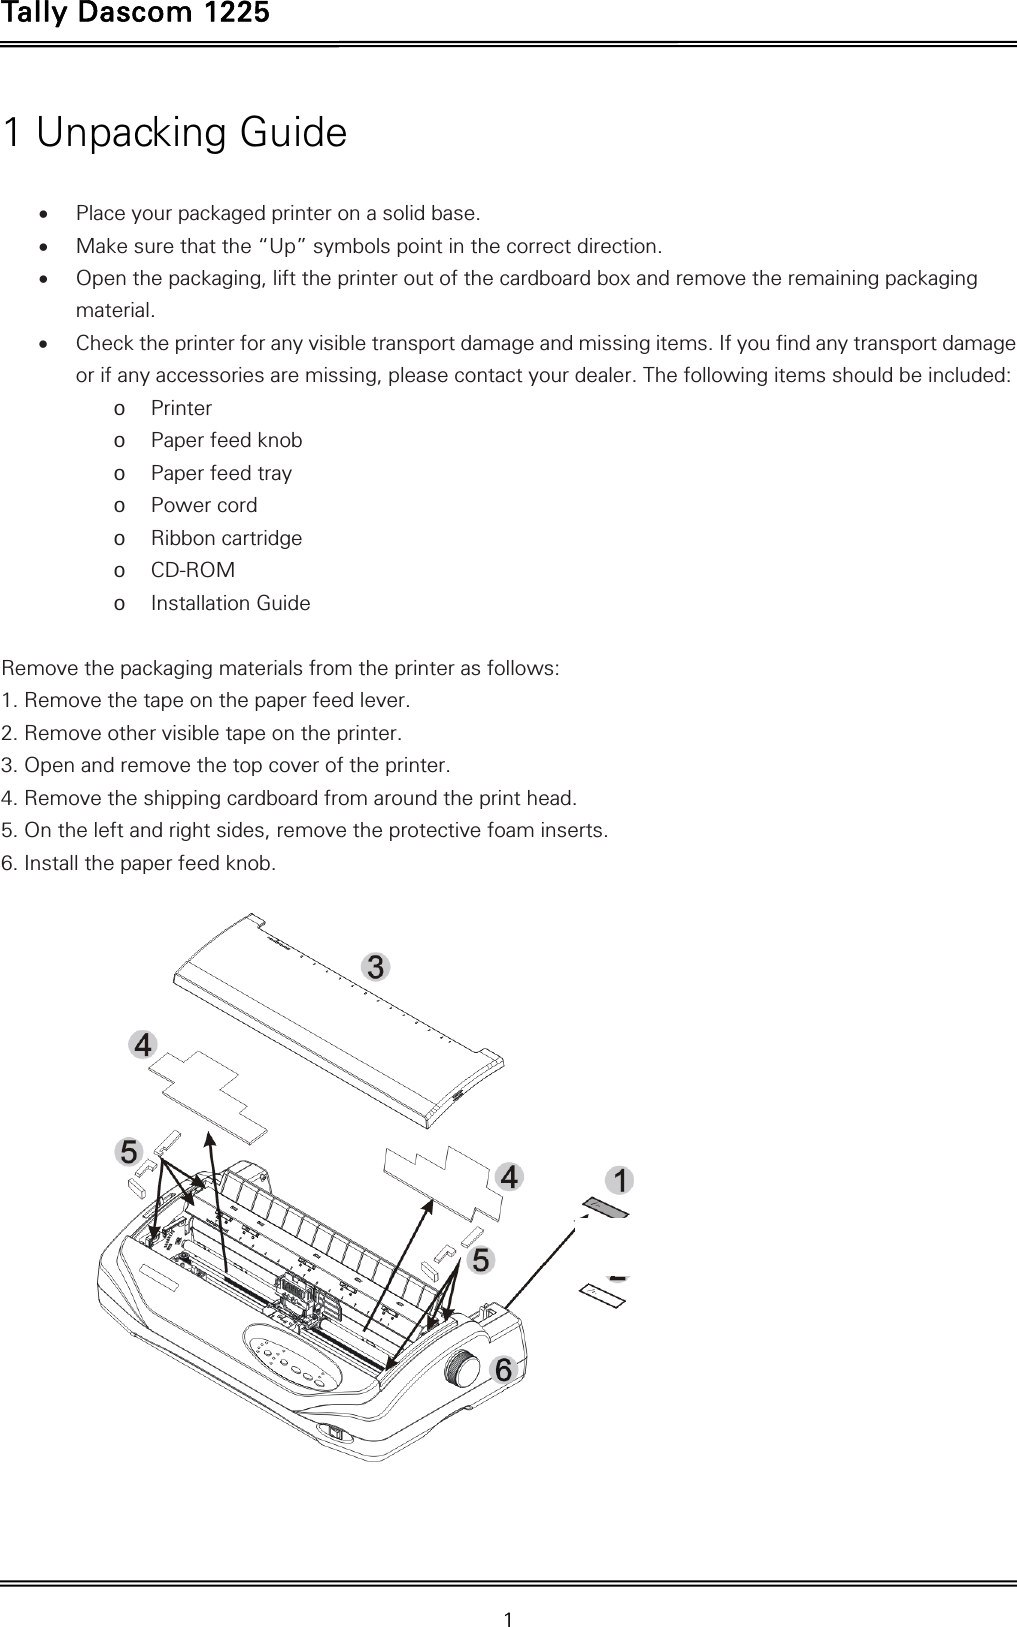 Tally Dascom 1225   1  1 Unpacking Guide   Place your packaged printer on a solid base.  Make sure that the “Up” symbols point in the correct direction.  Open the packaging, lift the printer out of the cardboard box and remove the remaining packaging material.  Check the printer for any visible transport damage and missing items. If you find any transport damage or if any accessories are missing, please contact your dealer. The following items should be included: o Printer o Paper feed knob o Paper feed tray o Power cord o Ribbon cartridge o CD-ROM o Installation Guide  Remove the packaging materials from the printer as follows: 1. Remove the tape on the paper feed lever. 2. Remove other visible tape on the printer.   3. Open and remove the top cover of the printer. 4. Remove the shipping cardboard from around the print head. 5. On the left and right sides, remove the protective foam inserts. 6. Install the paper feed knob.      